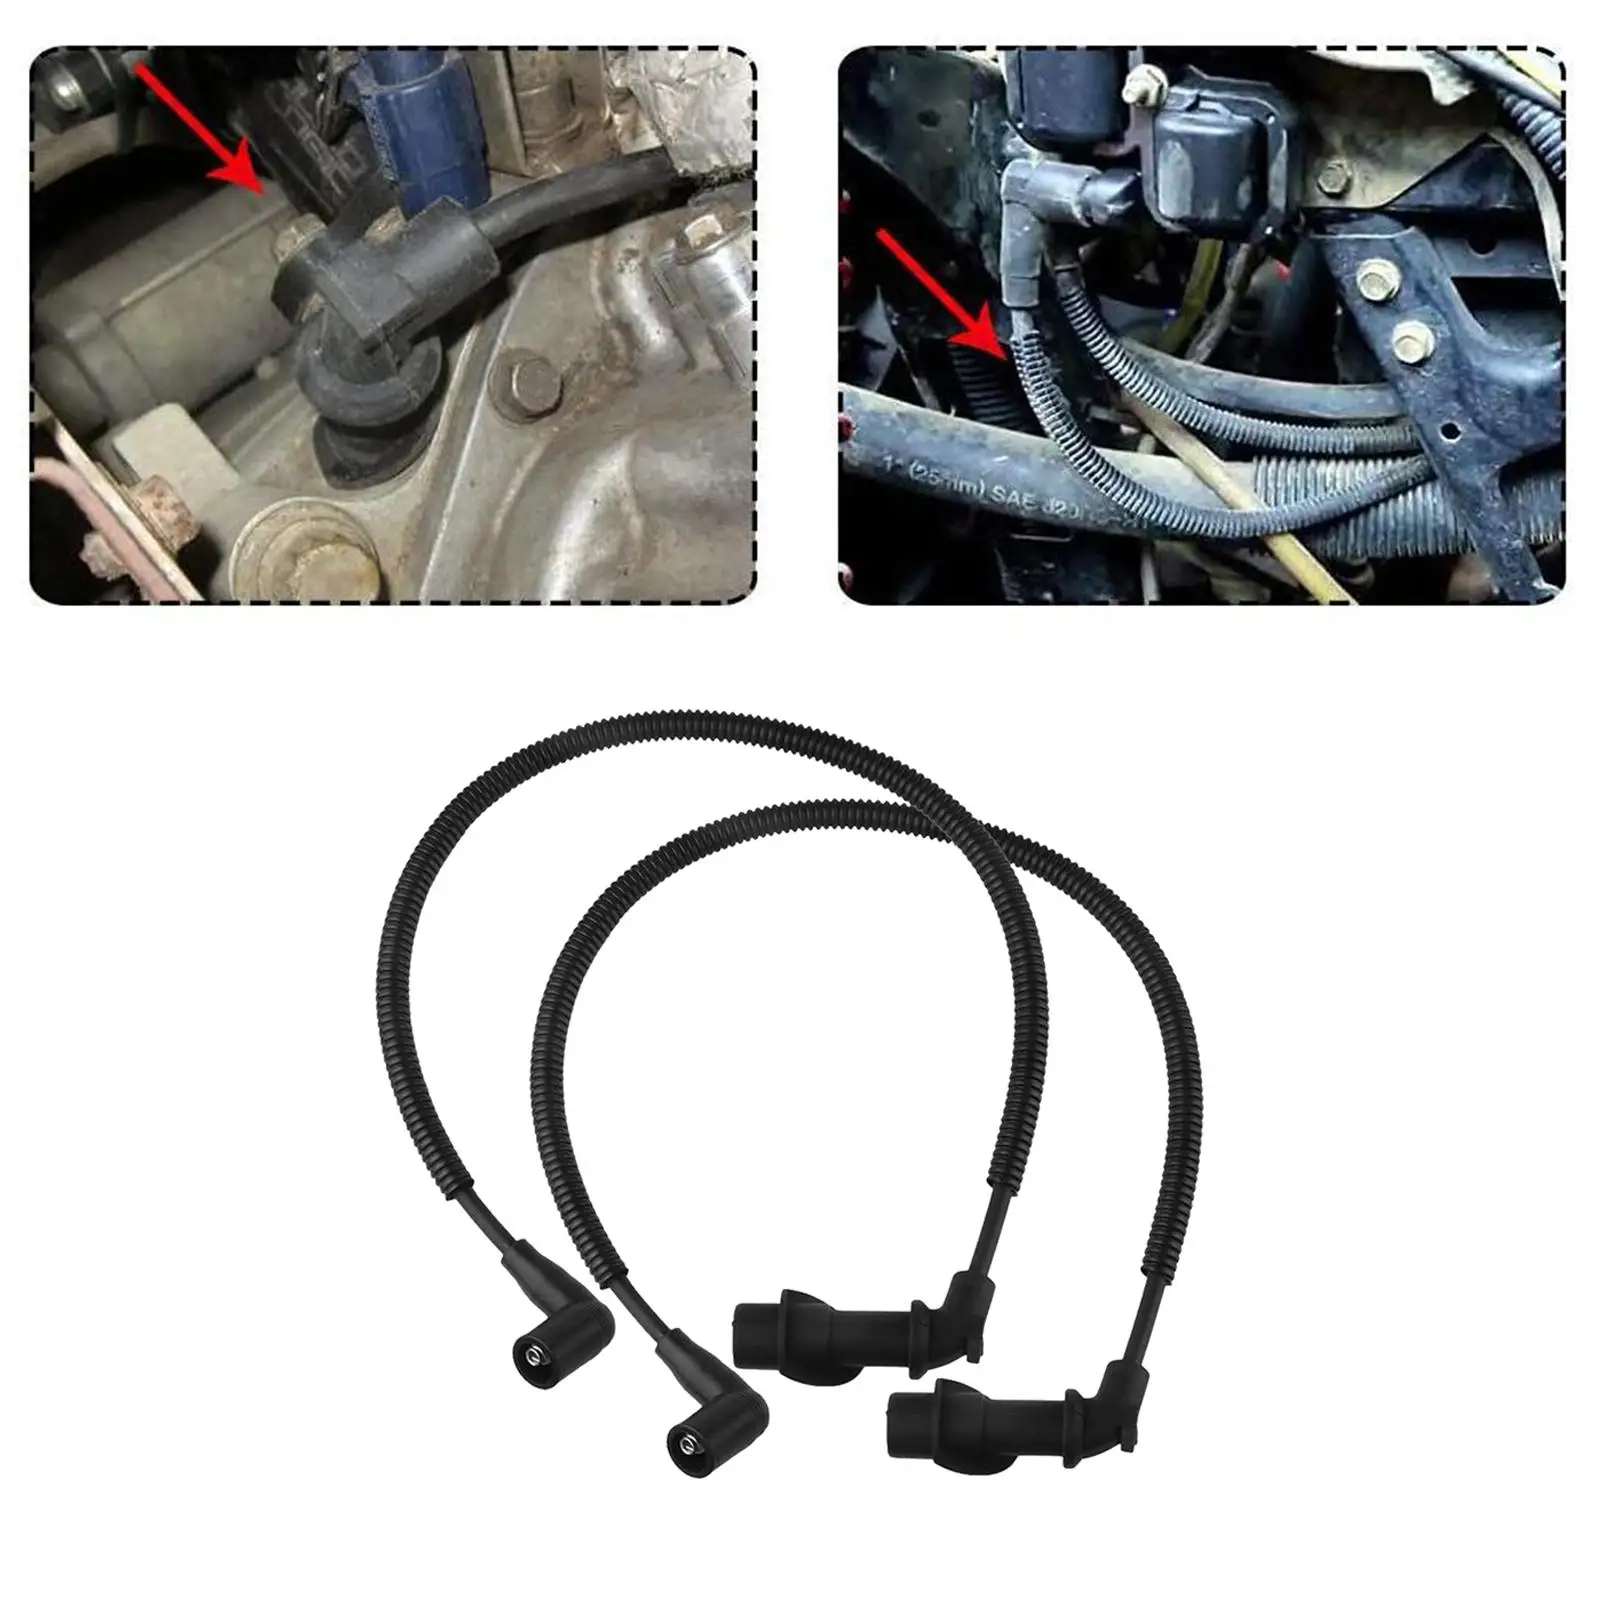 1 pair of spark plug ignition coil wires for athletes 800 4012439 high quality